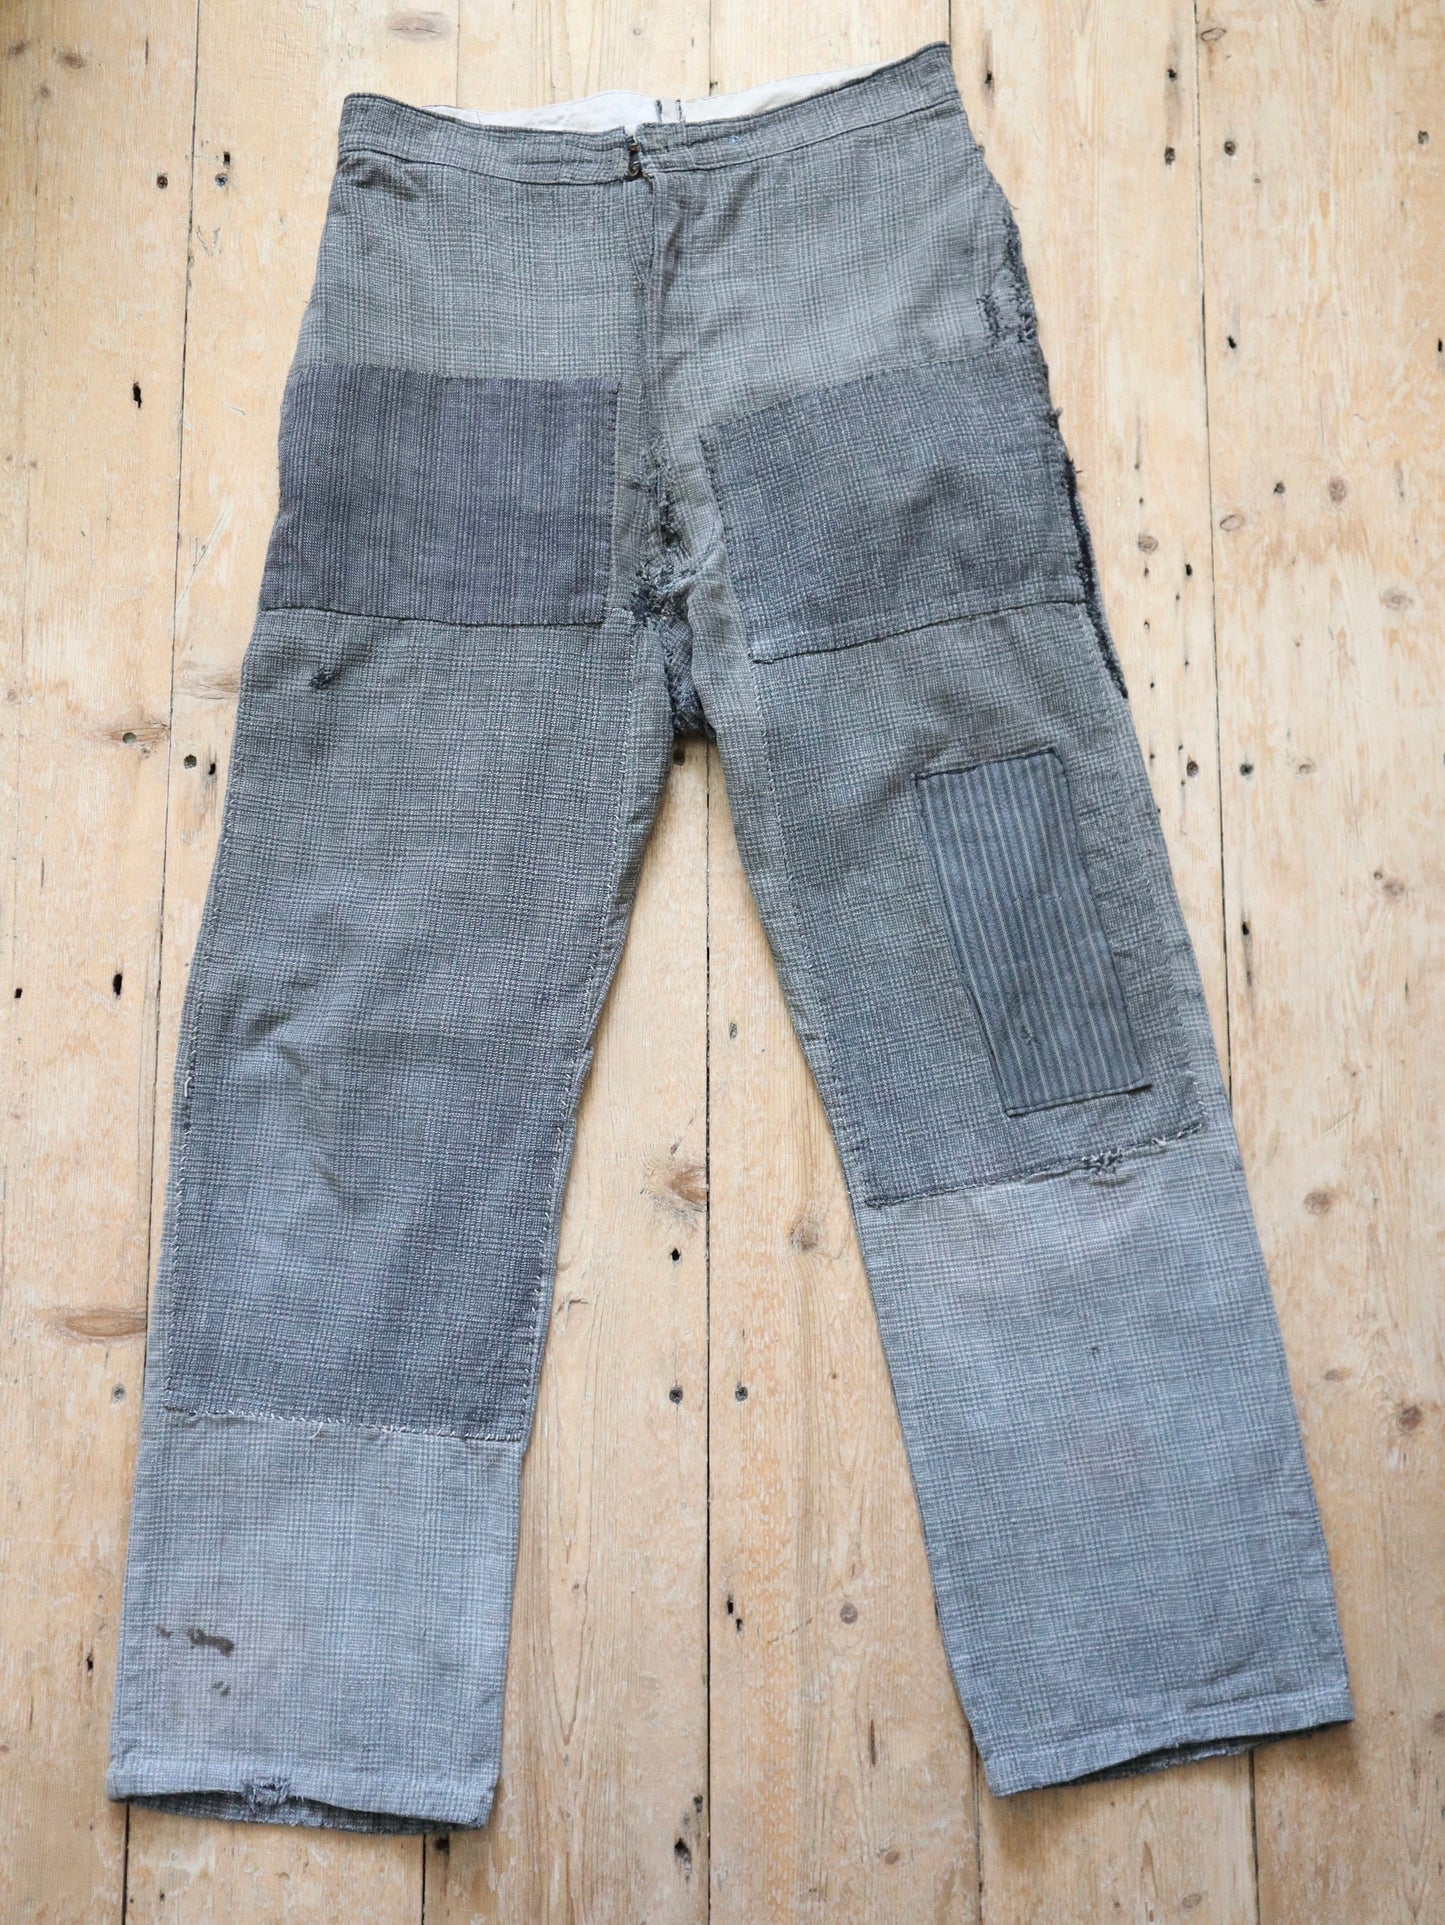 1920s French Workwear Chore Trousers Pants Grey Check Rare Early Patched